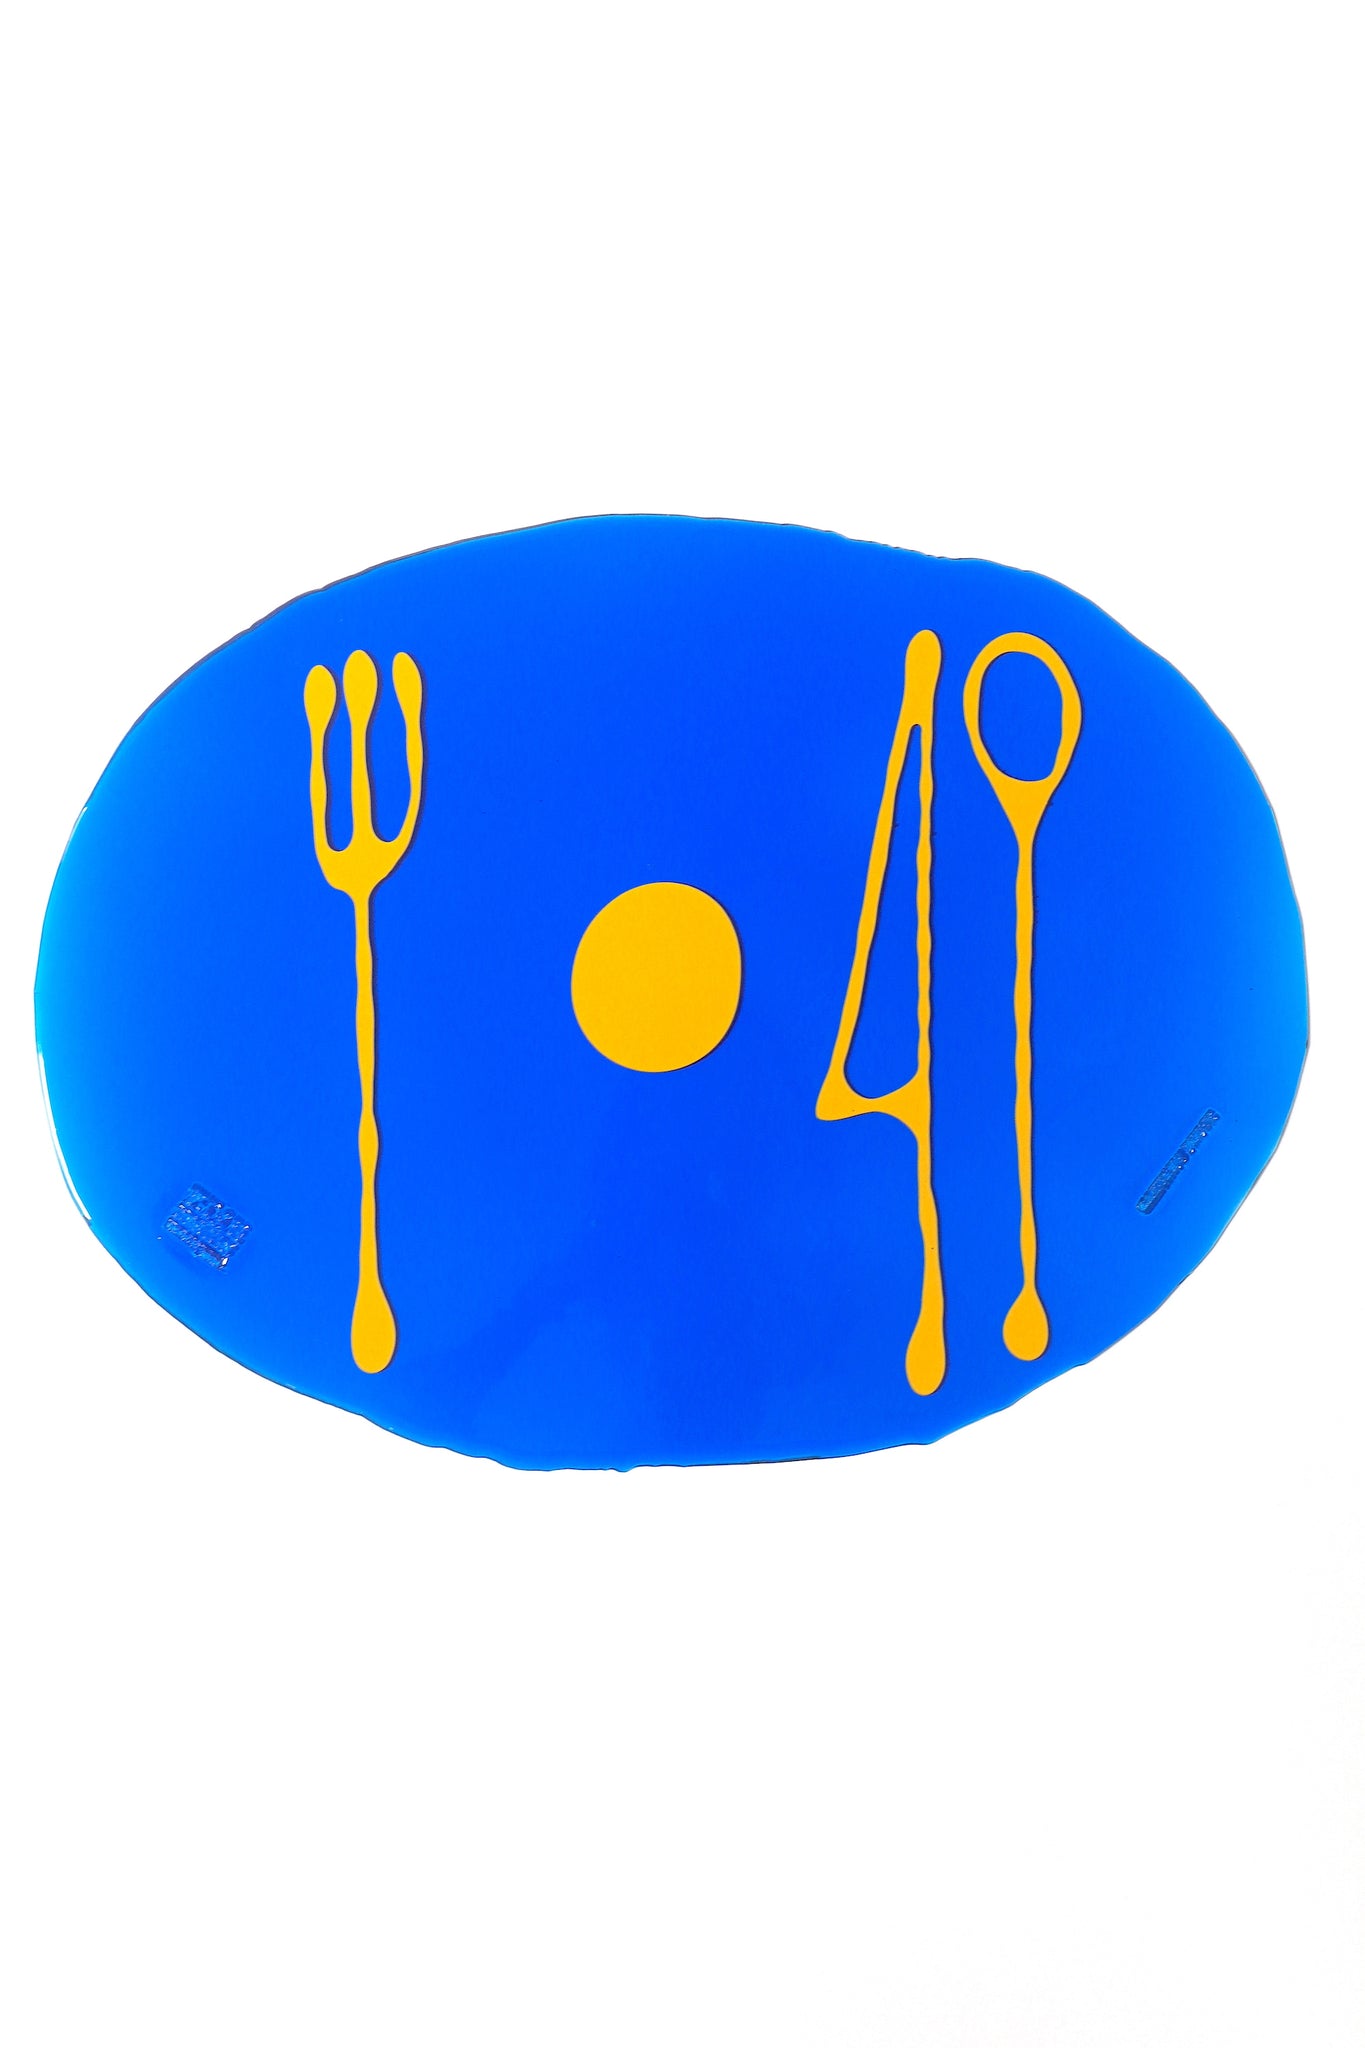 Placemat by Gaetano Pesce